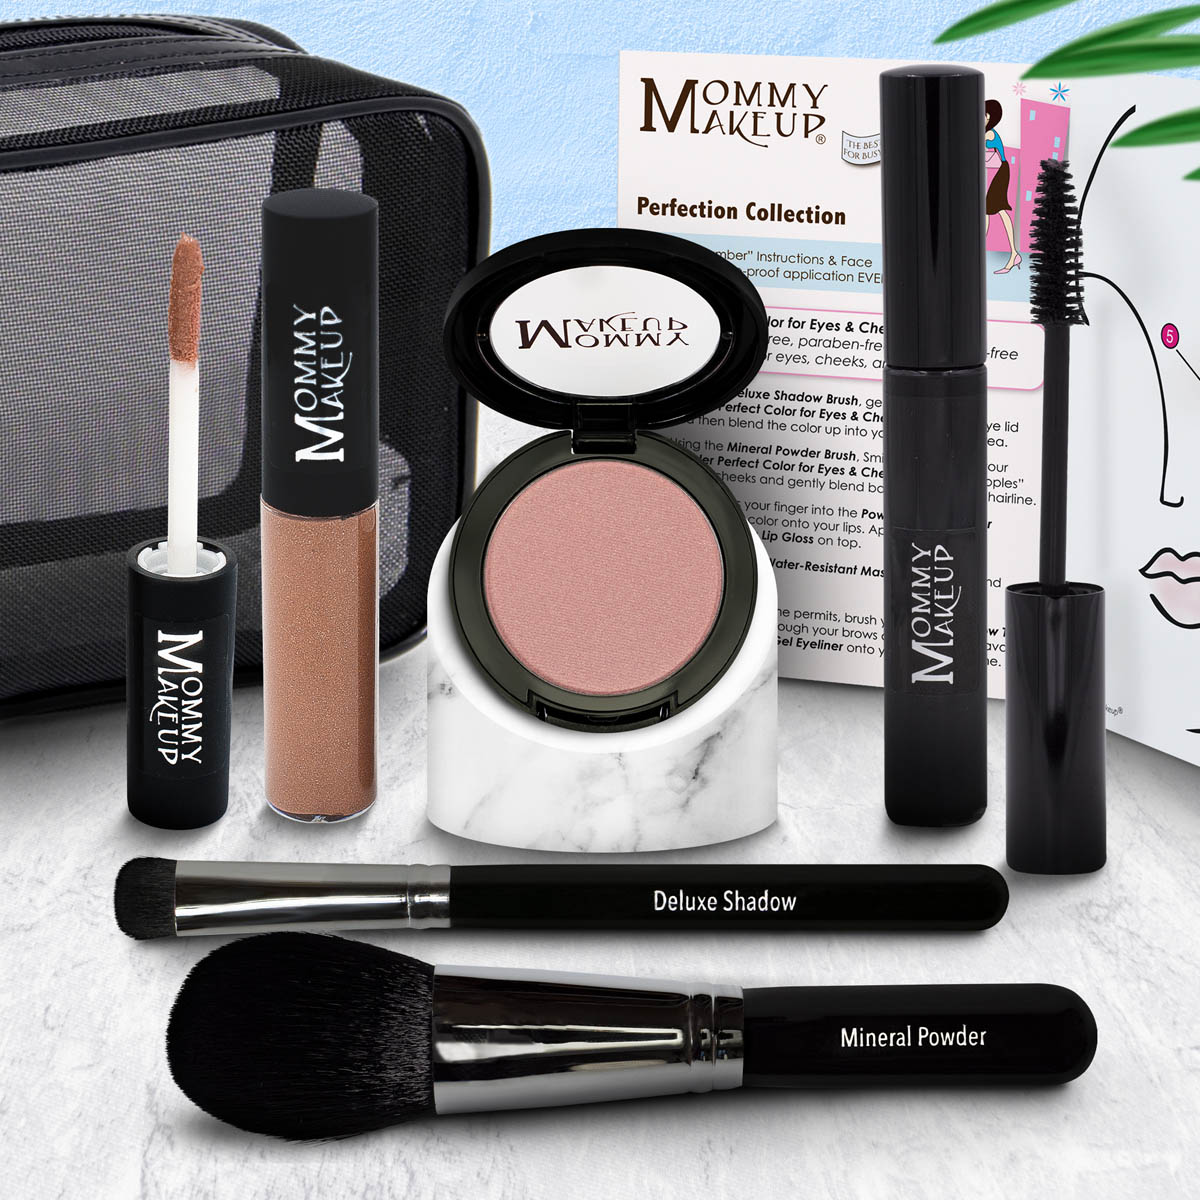 Perfection - 6 piece kit for a quick, radiant look! Mommy Makeup